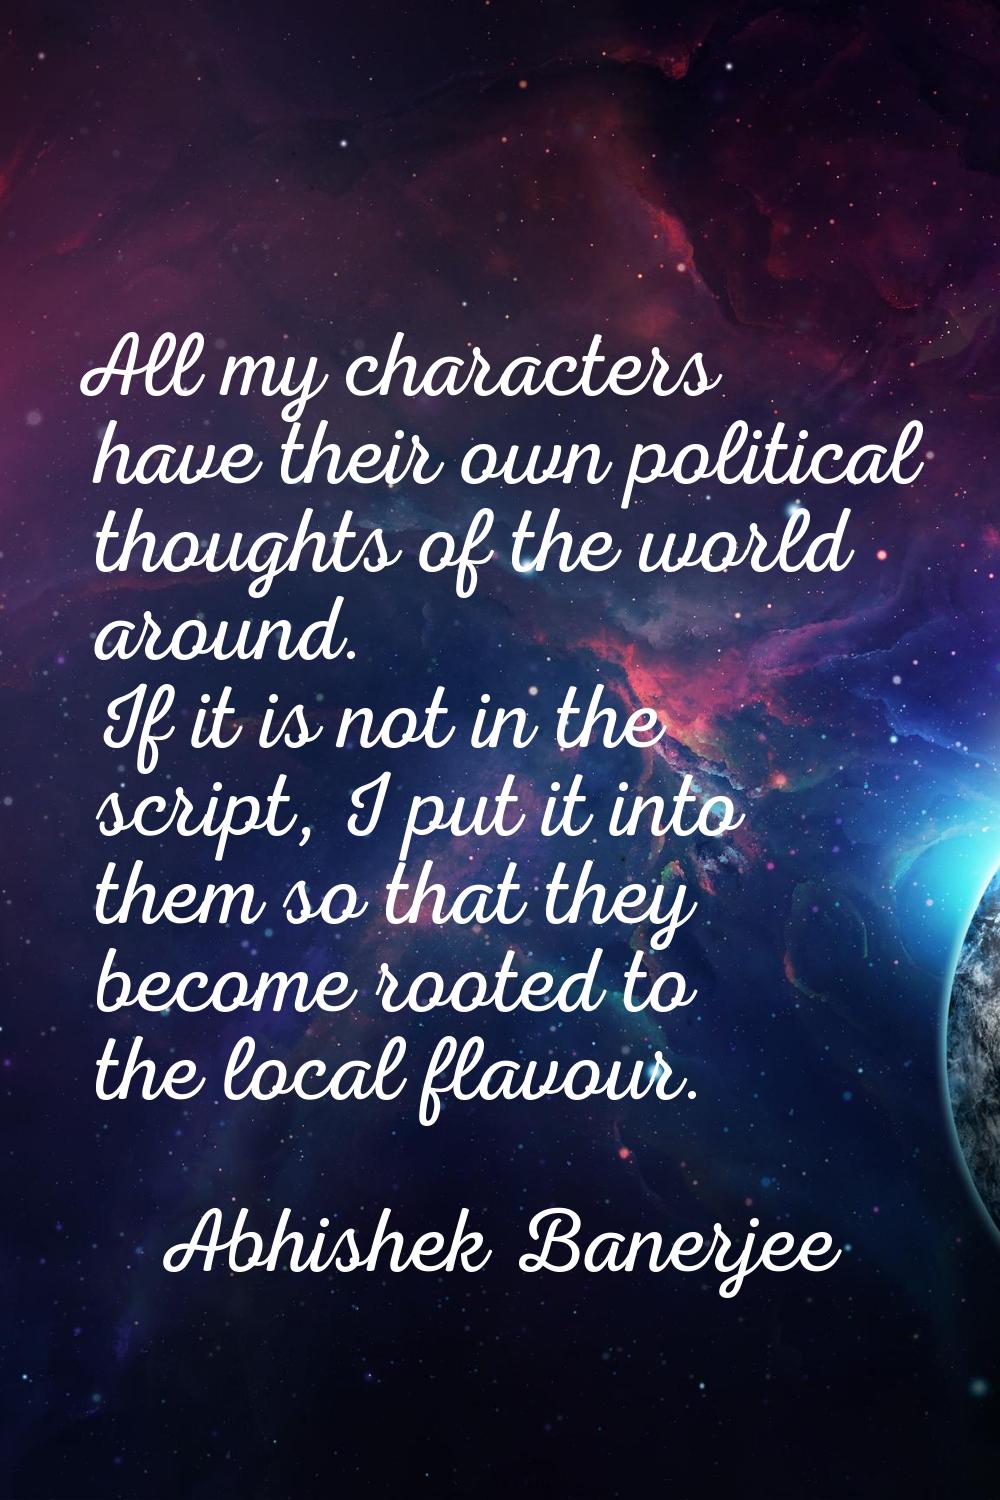 All my characters have their own political thoughts of the world around. If it is not in the script